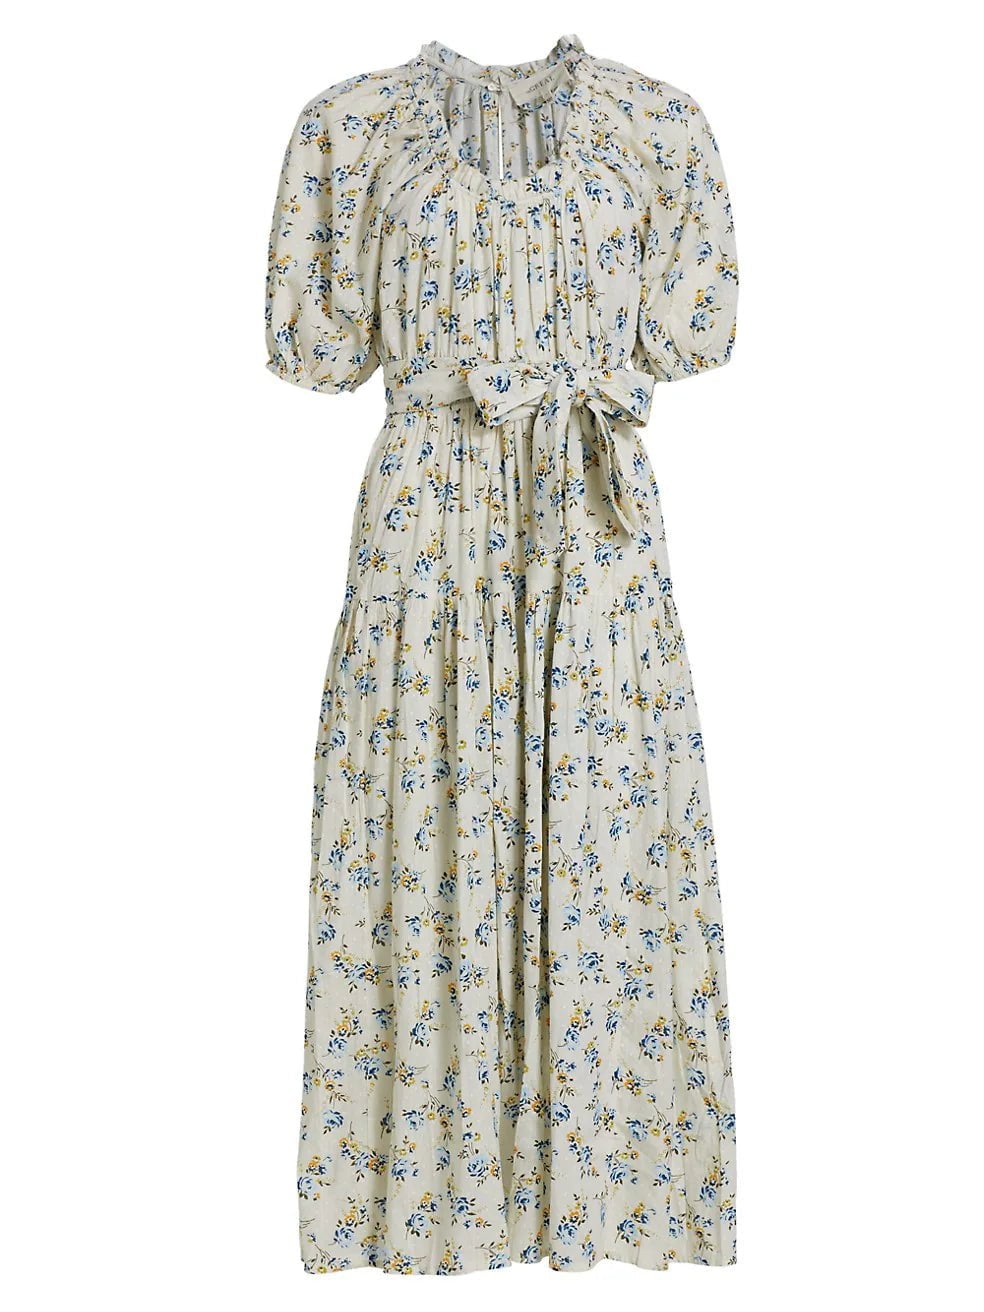 The Great Dress The Great | The Moonstone Dress in Cream Kerchief Rose Print